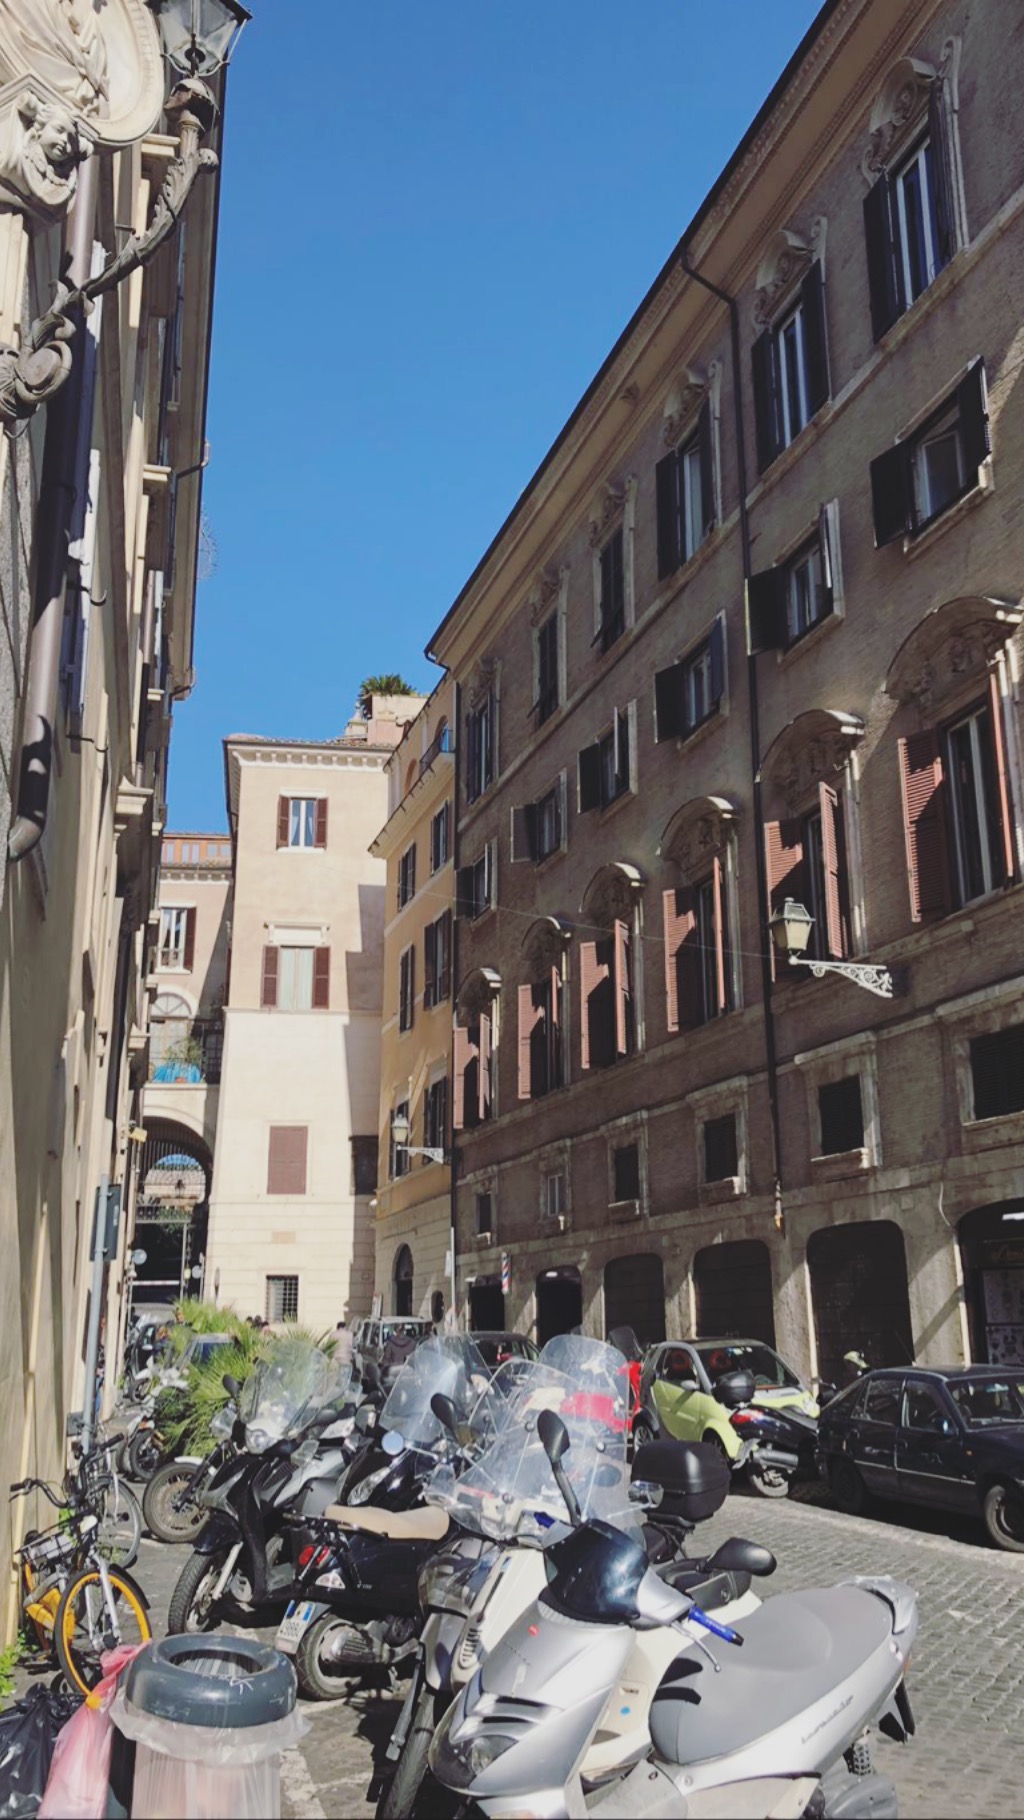 Blue skies in the streets of Rome